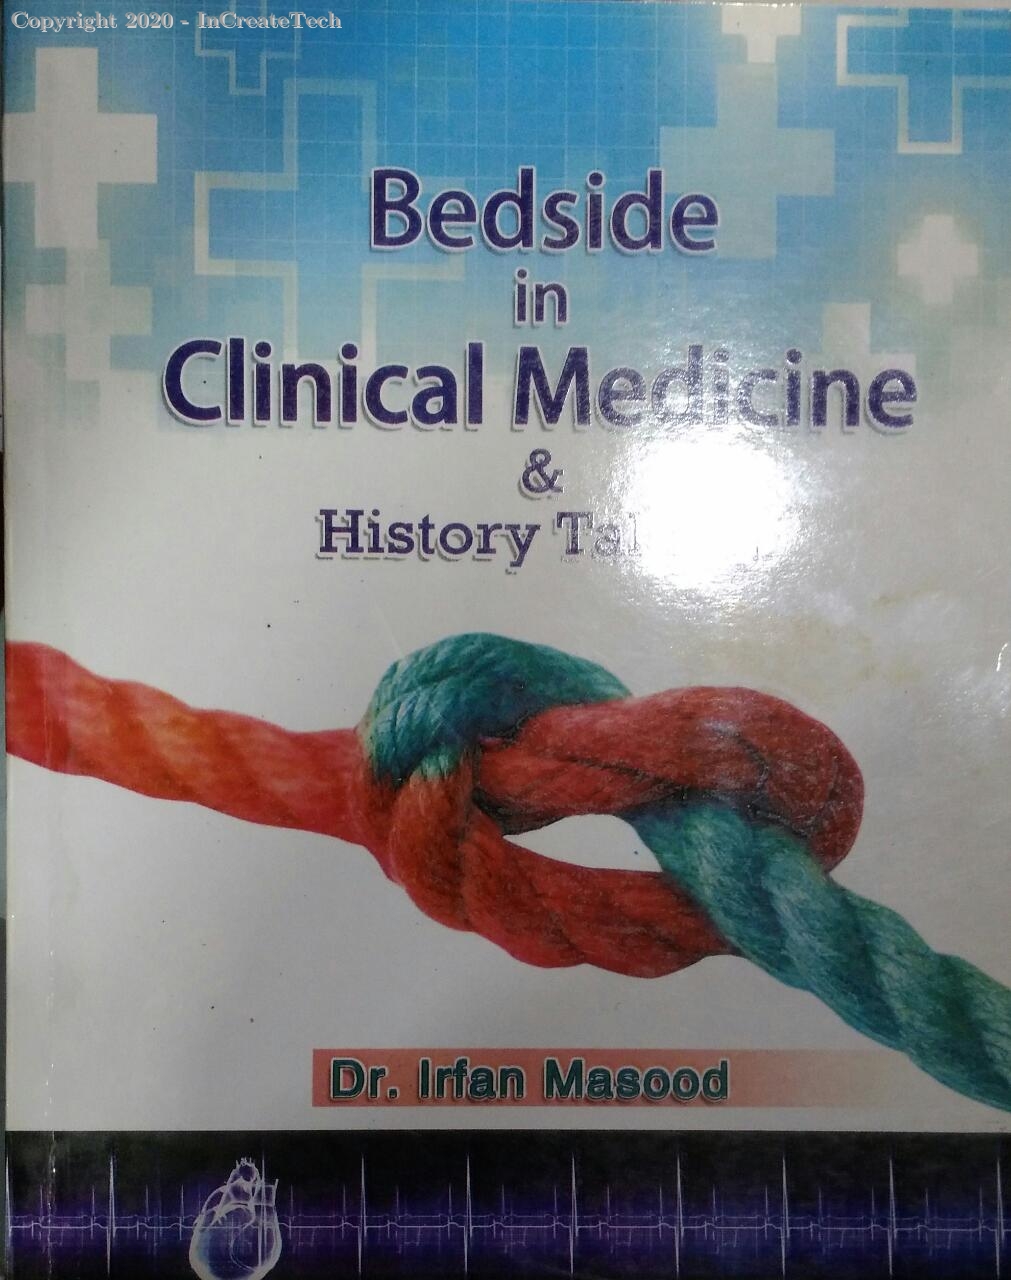 beside in clinical medicine & history taking BY DR.IRFAN MASOOD